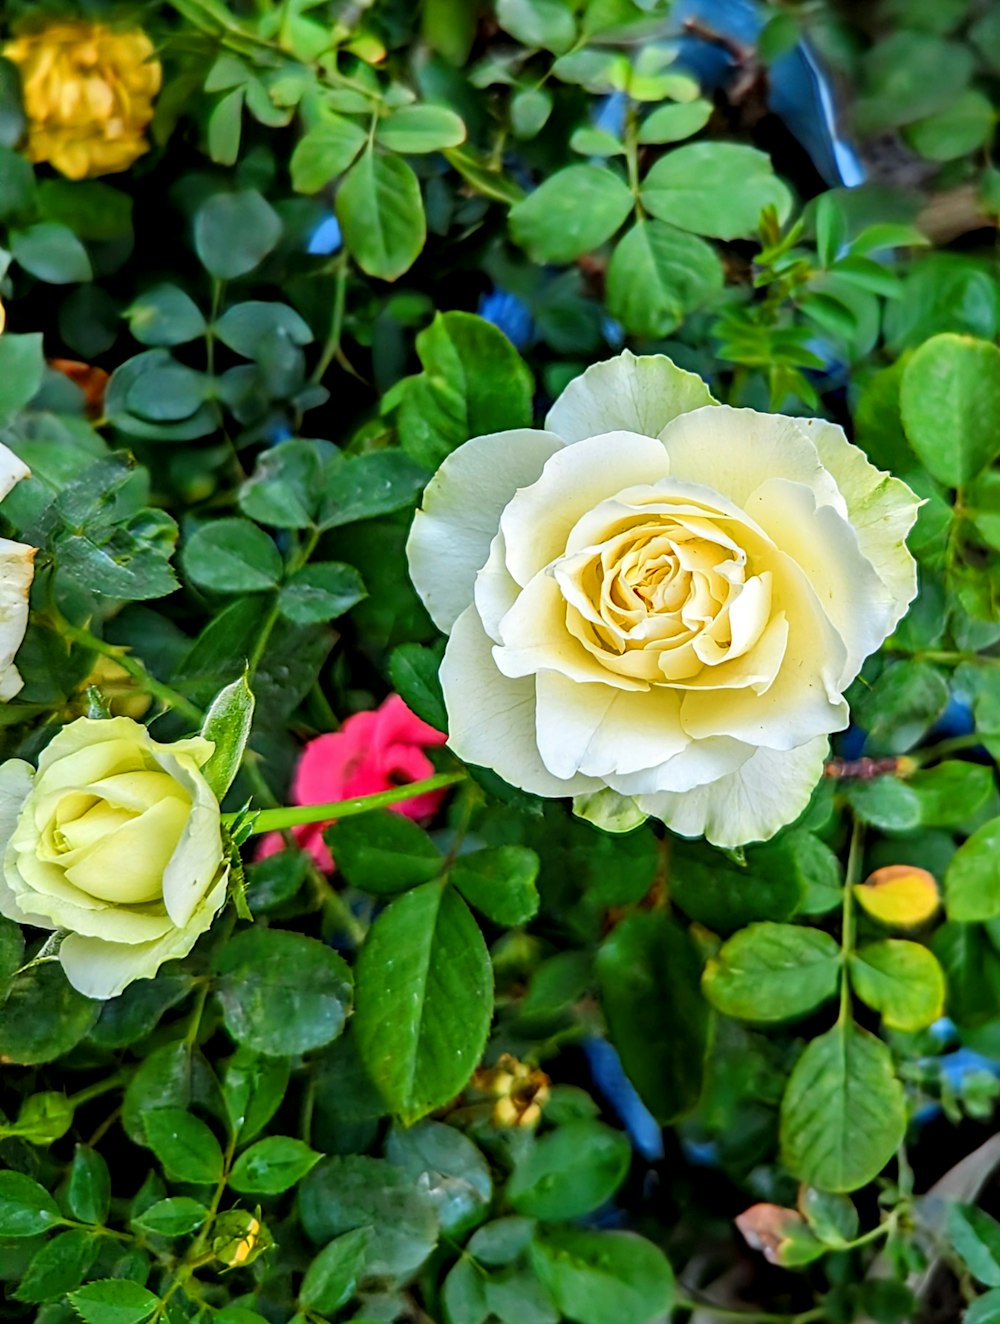 a close up of a yellow rose surrounded by green leaves